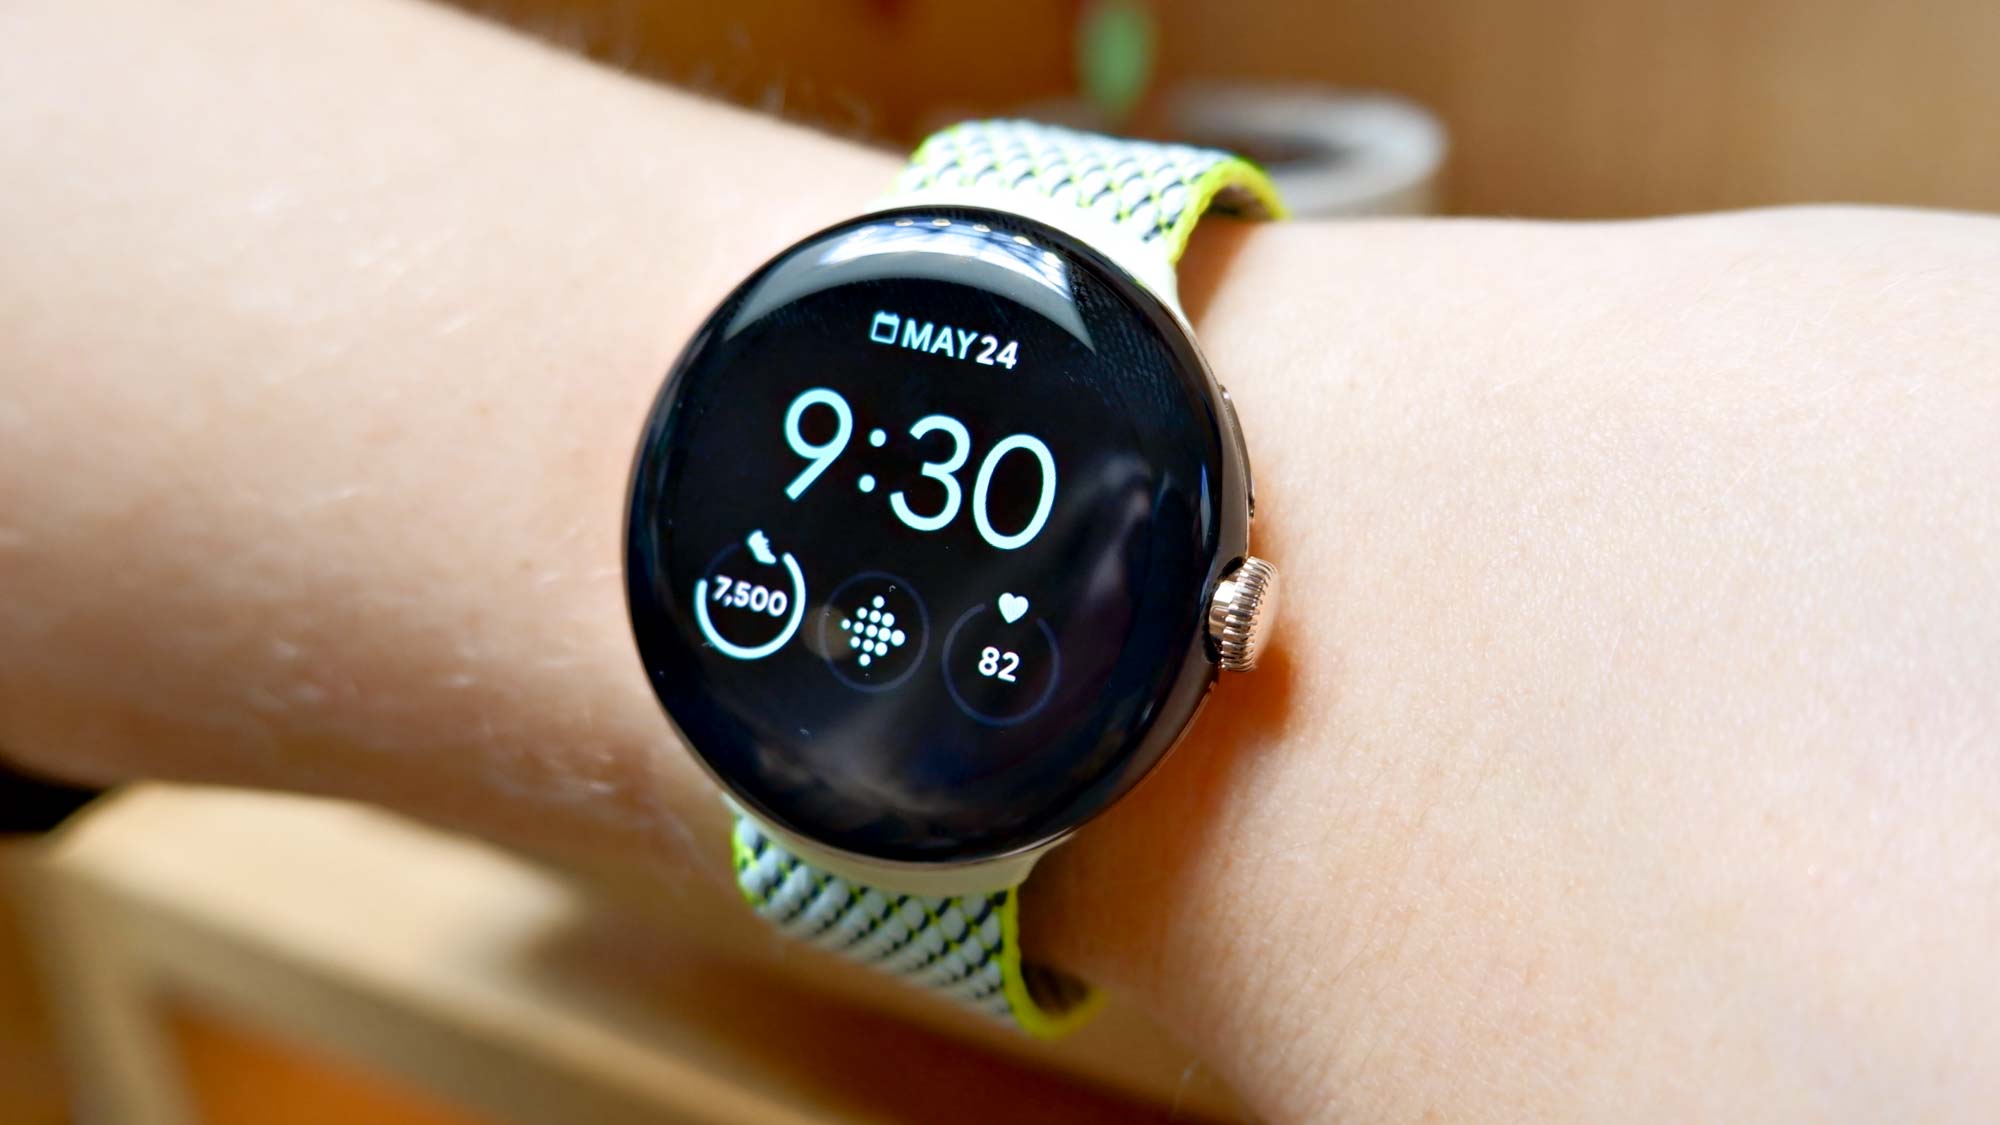 Google should make sure the Pixel Watch is comfortable to wear all day long.